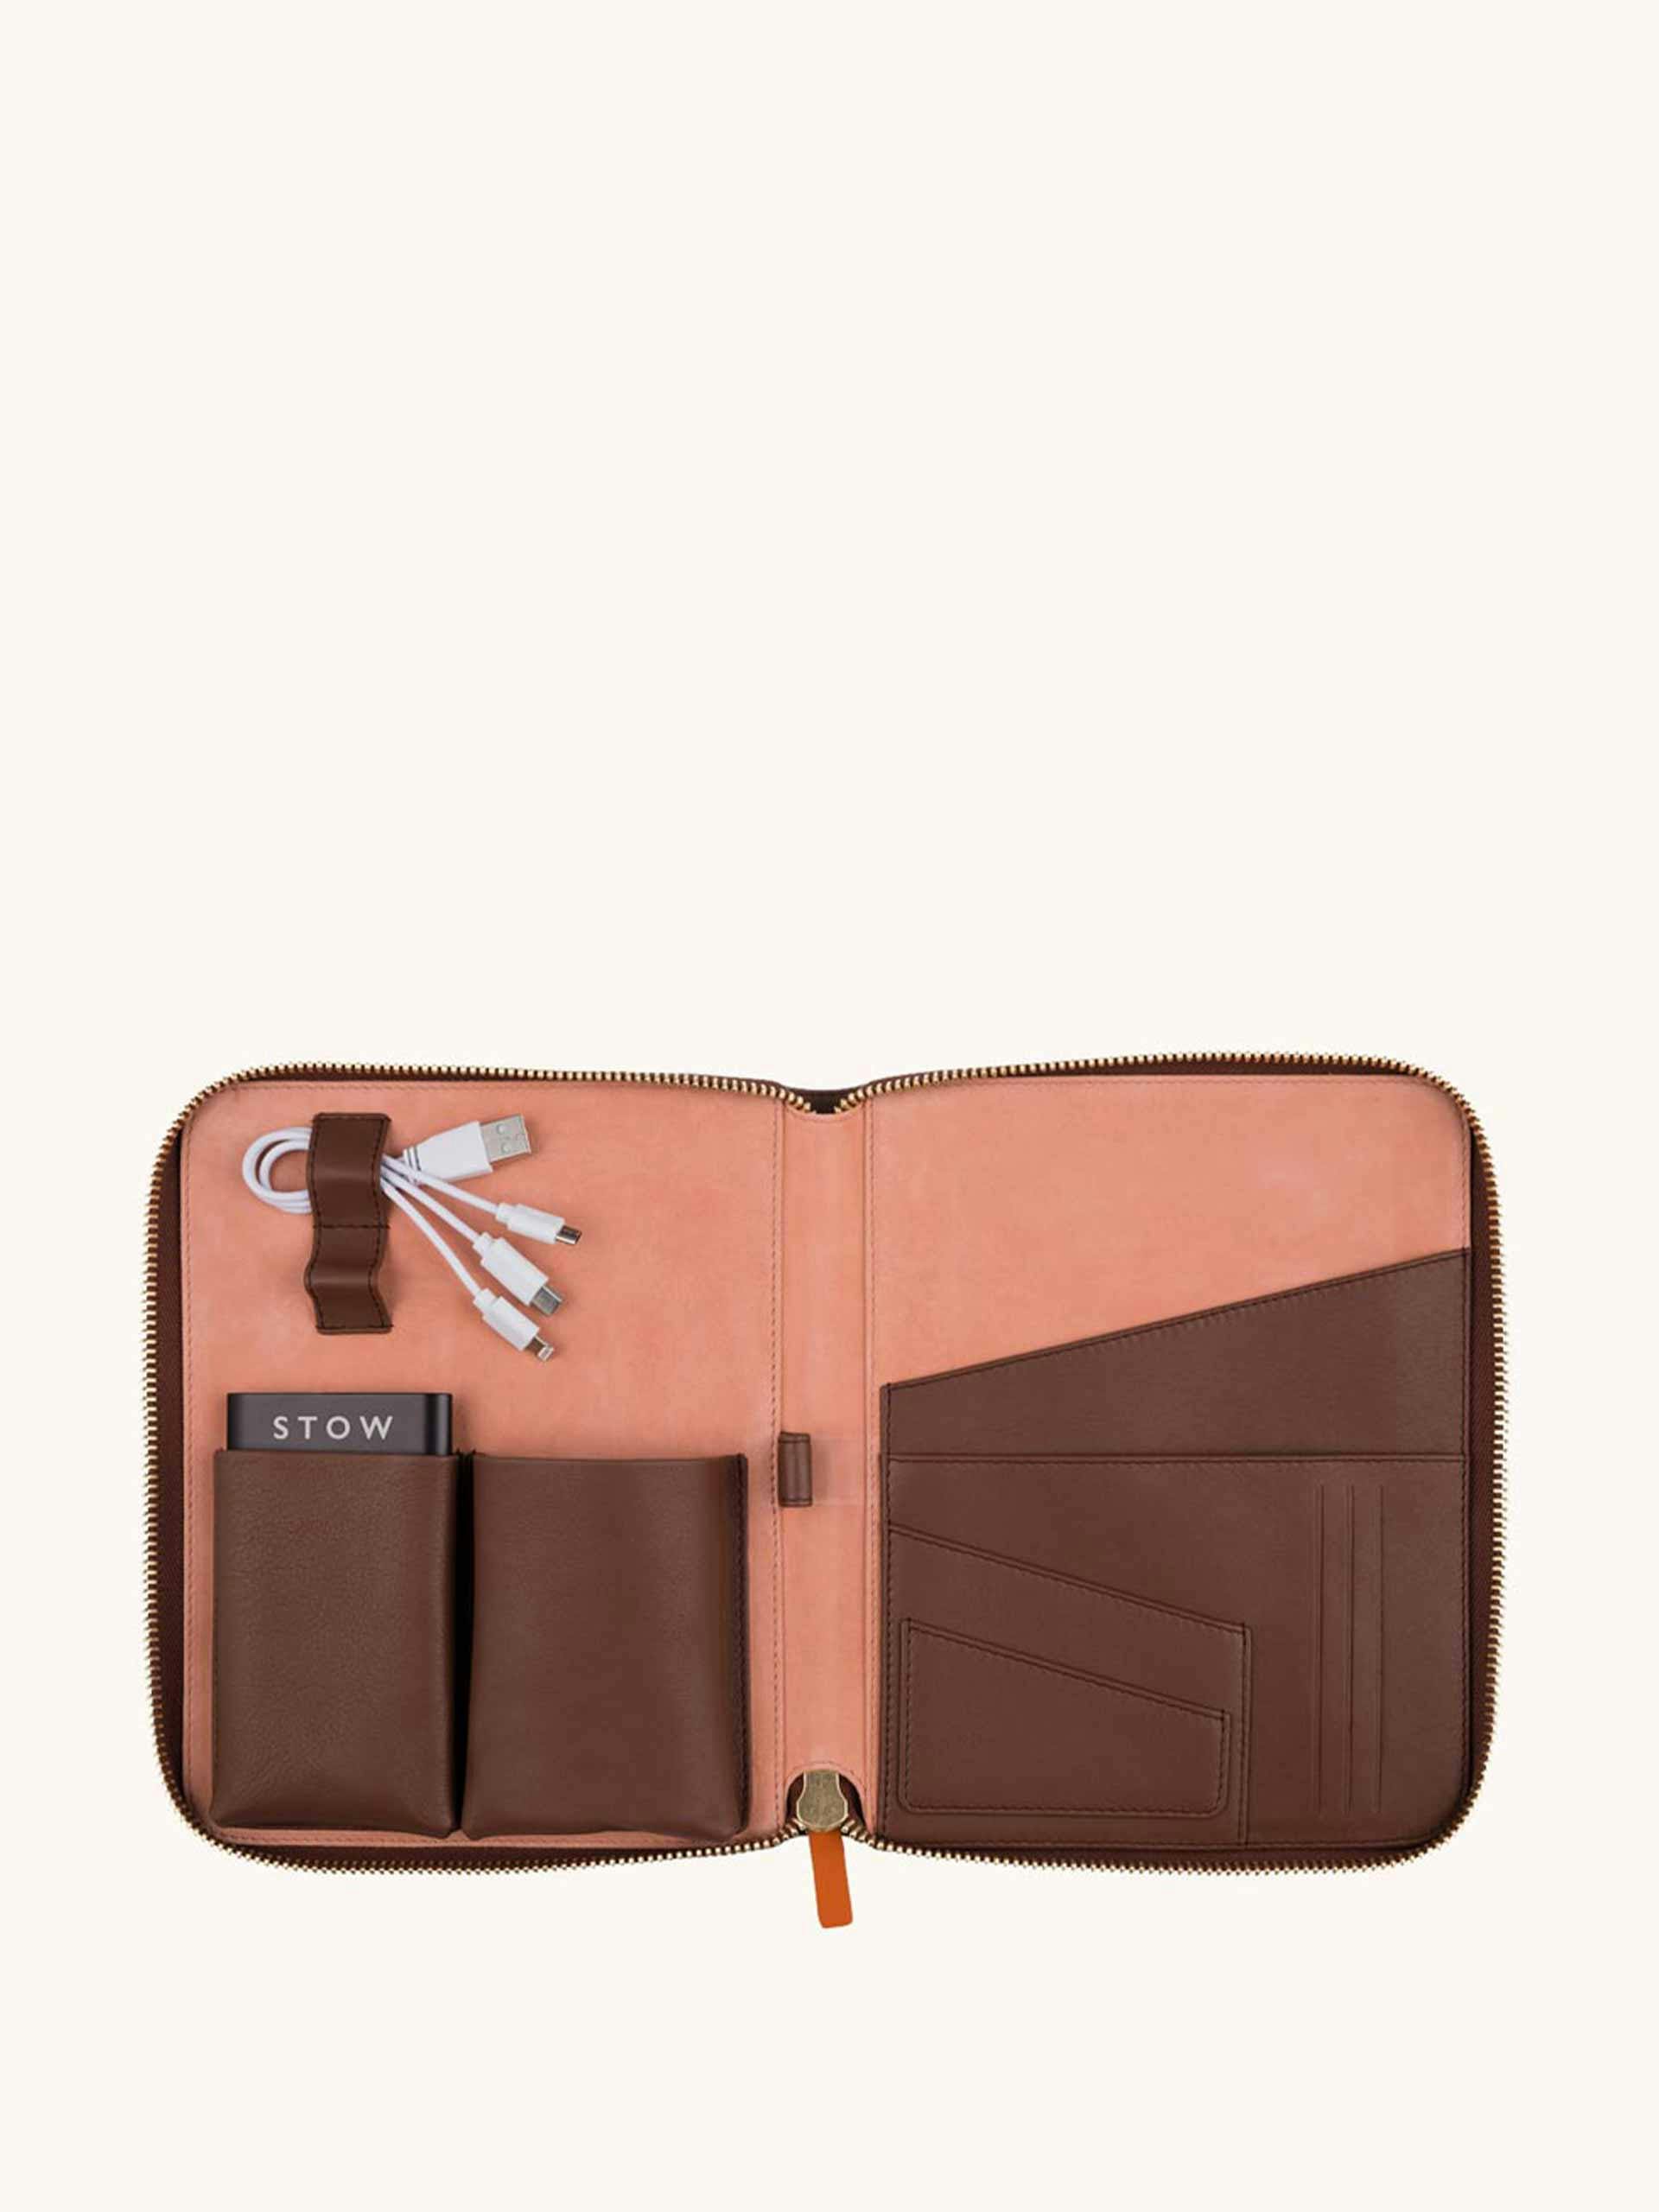 First class leather tech case